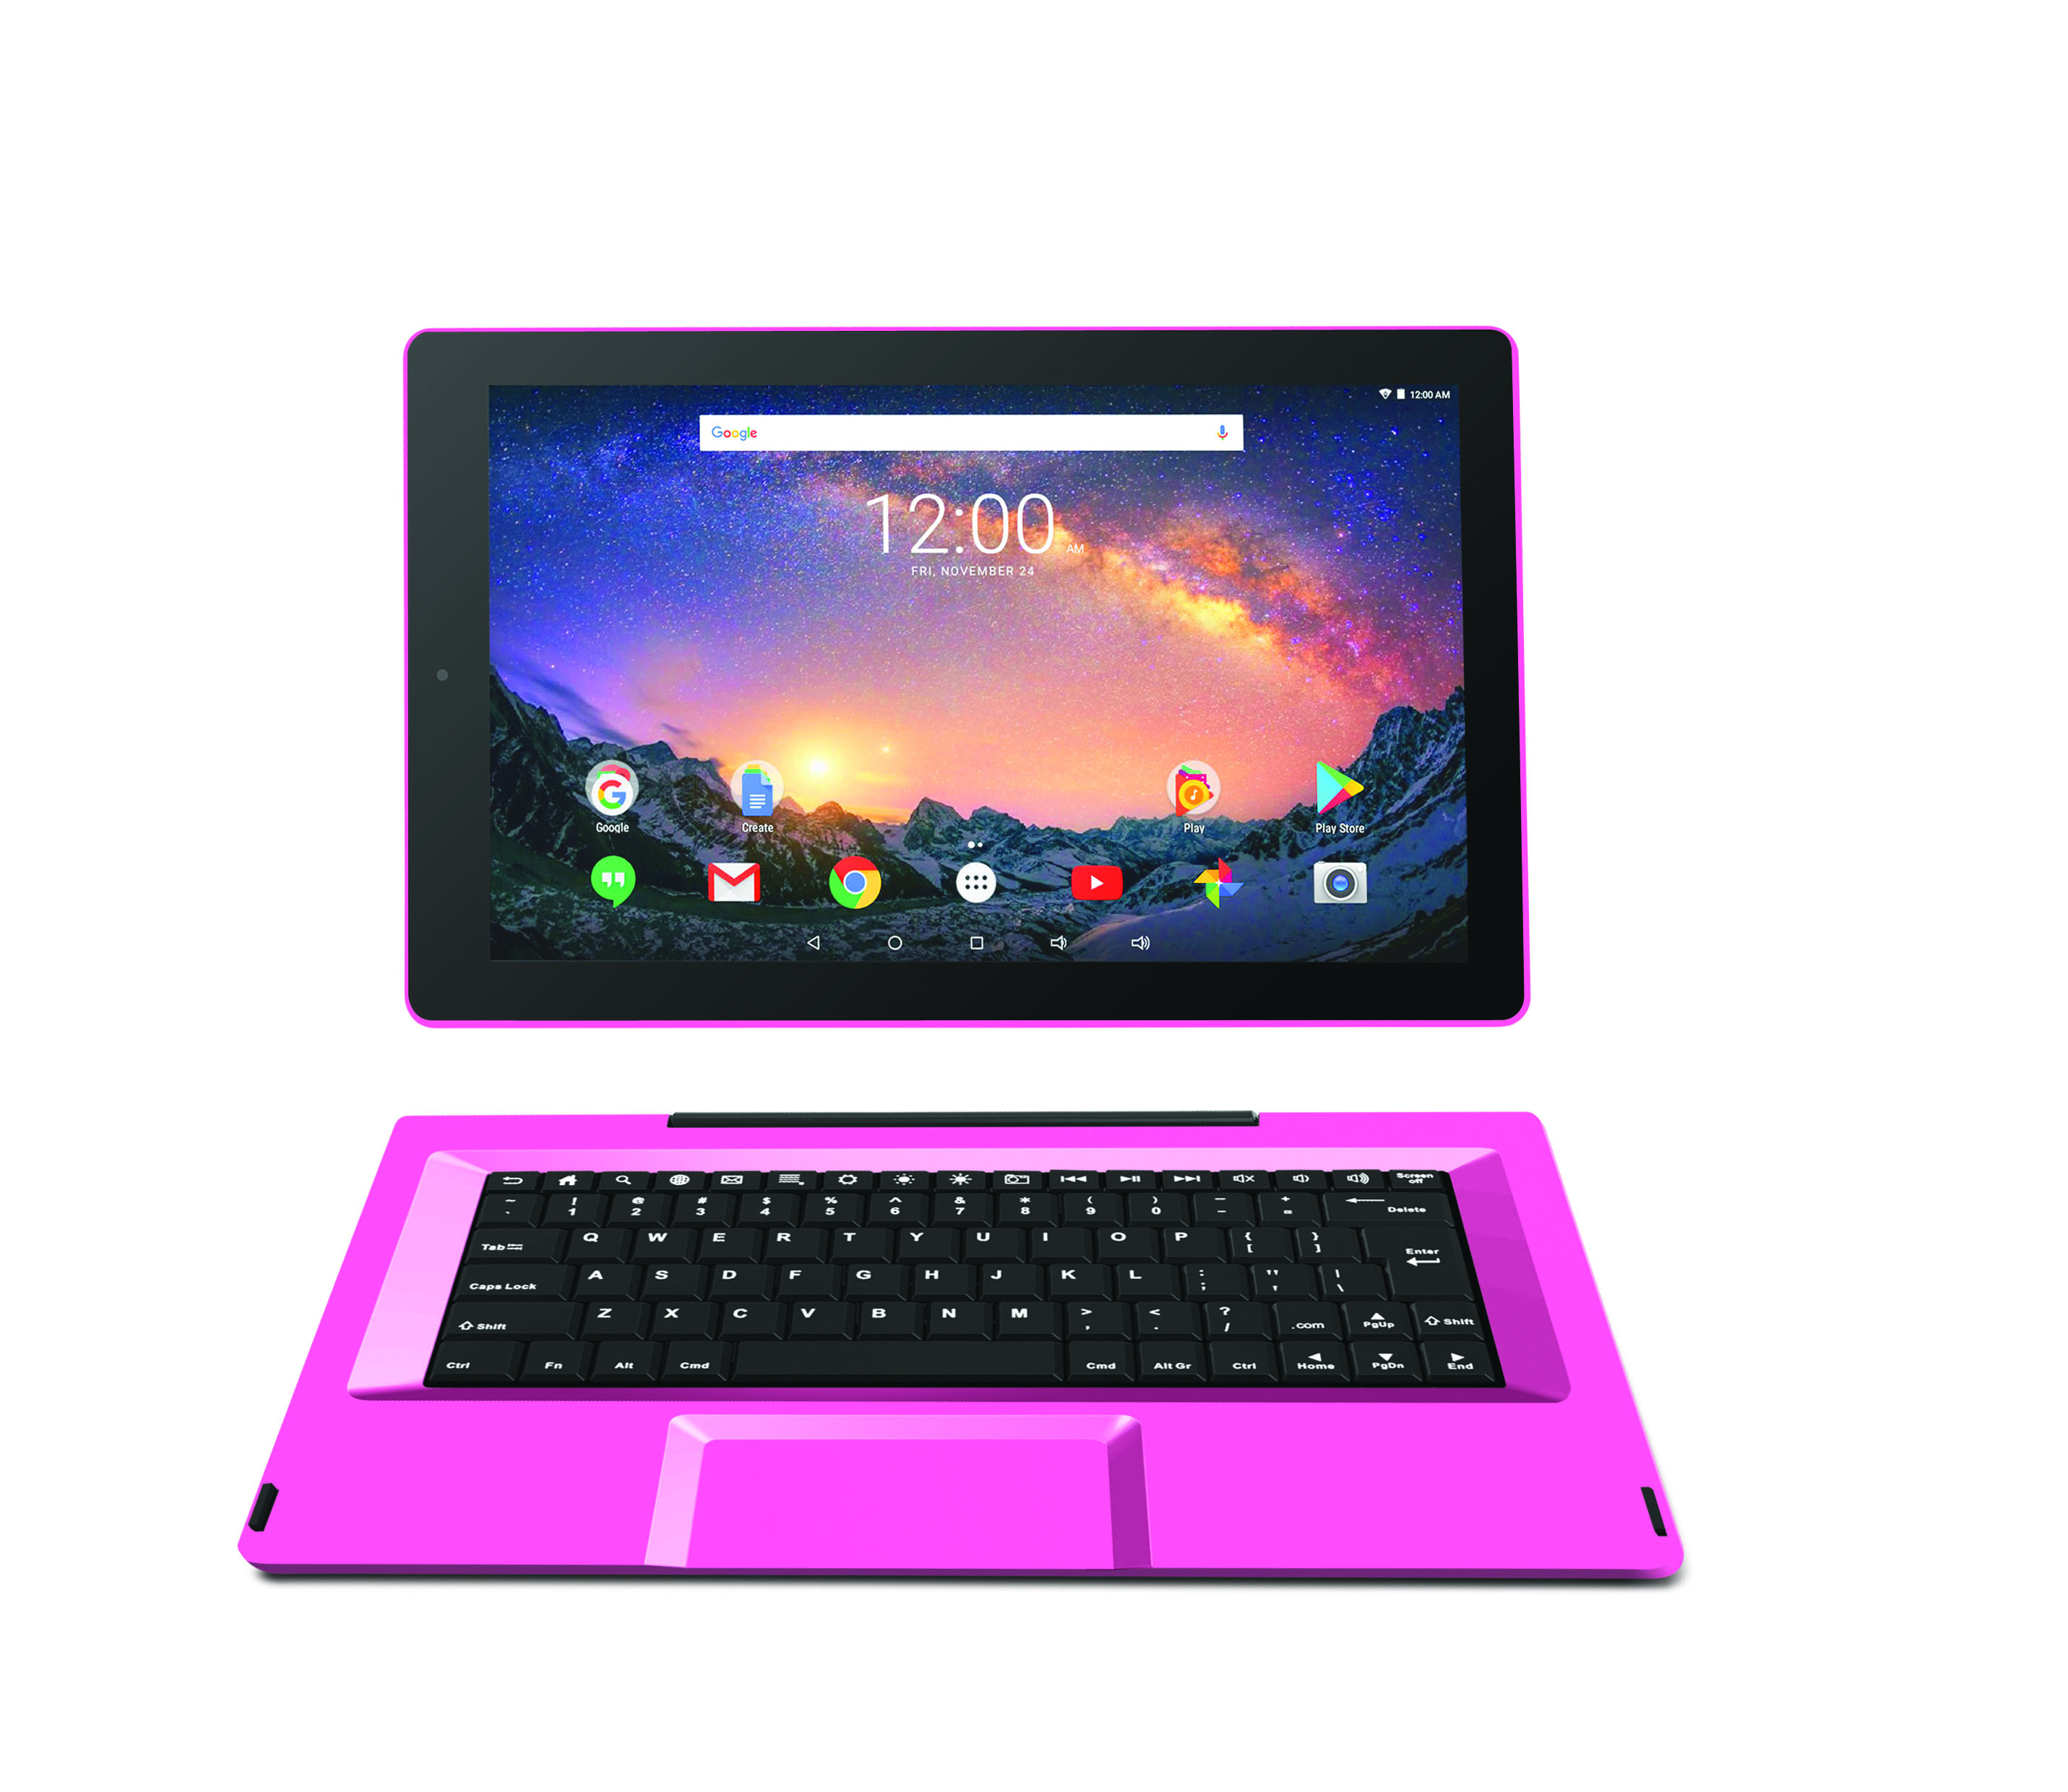 RCA Galileo Pro 11.5" 32GB 2-in-1 Tablet with Keyboard Case Android OS, Pink (Google Classroom Ready) - image 3 of 4